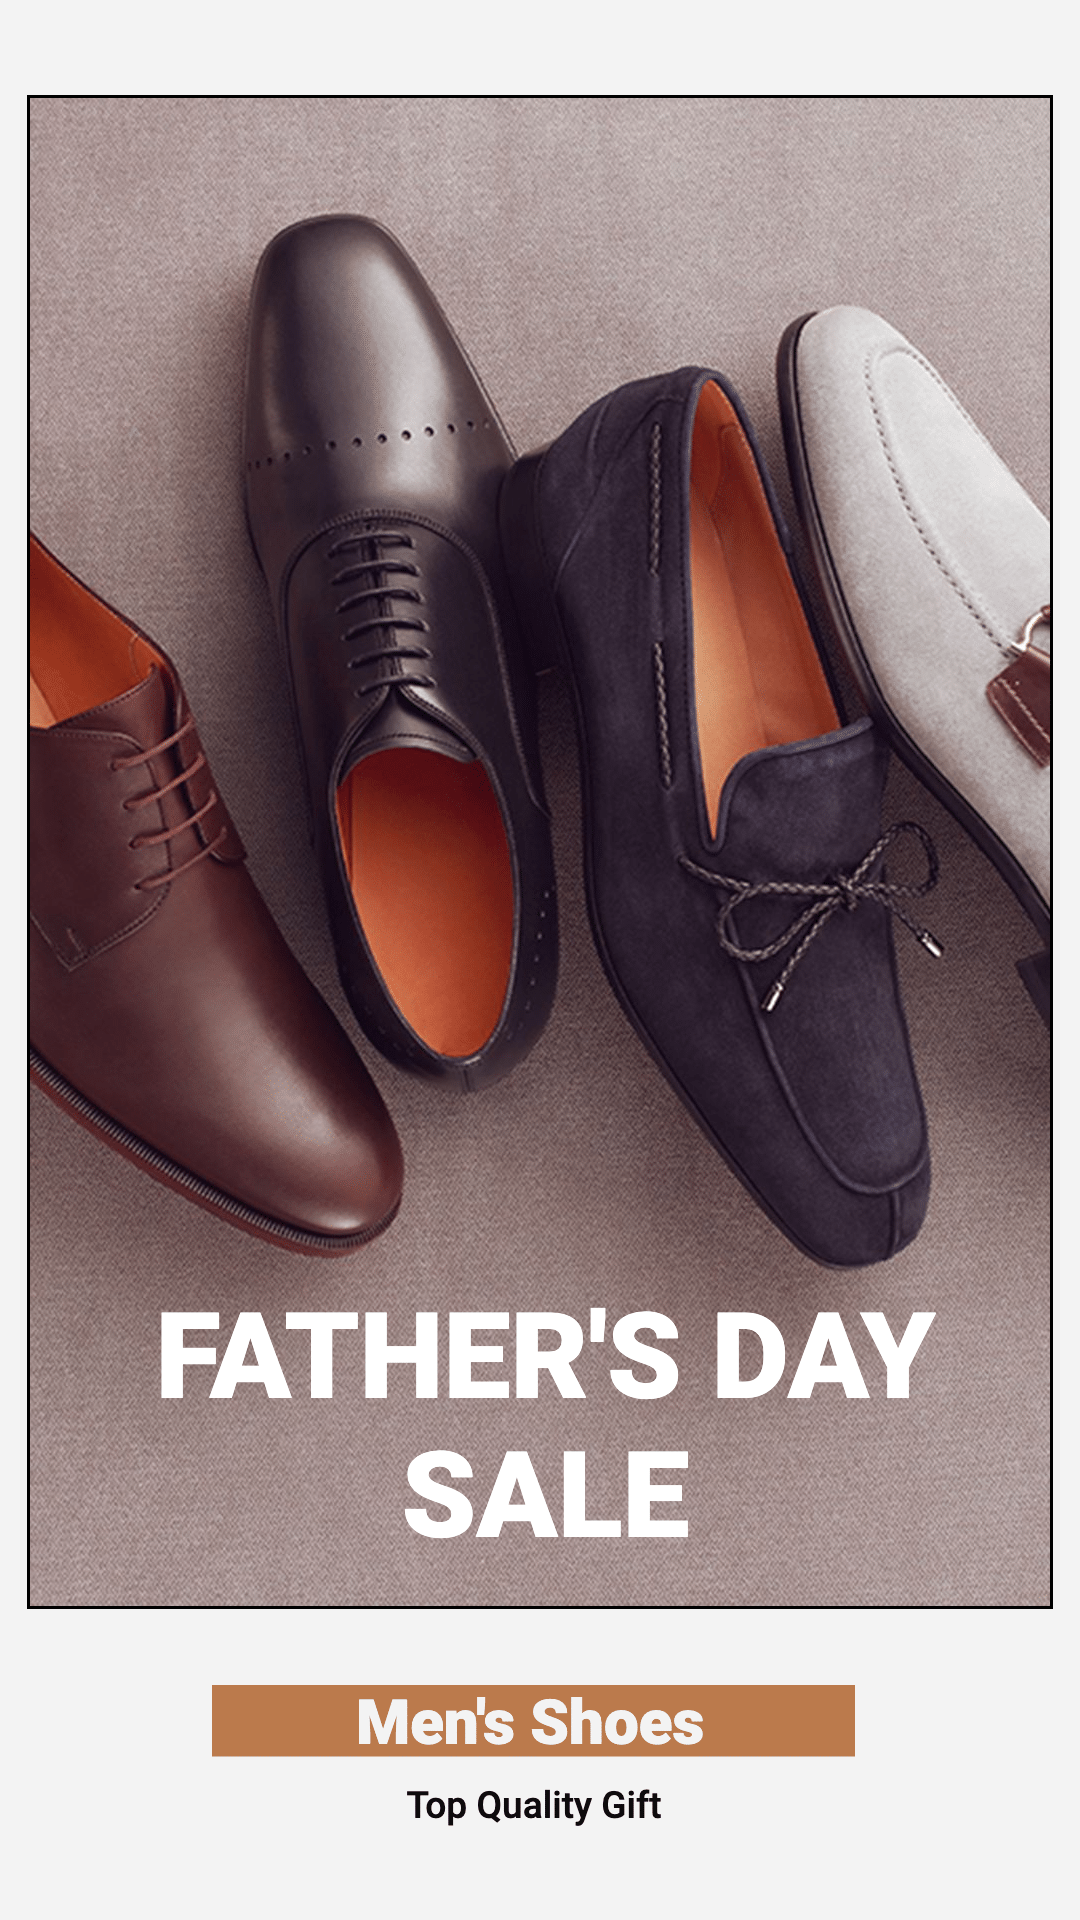 Black Line Stroke Men's Shoes Father's Day Promotion Ecommerce Story